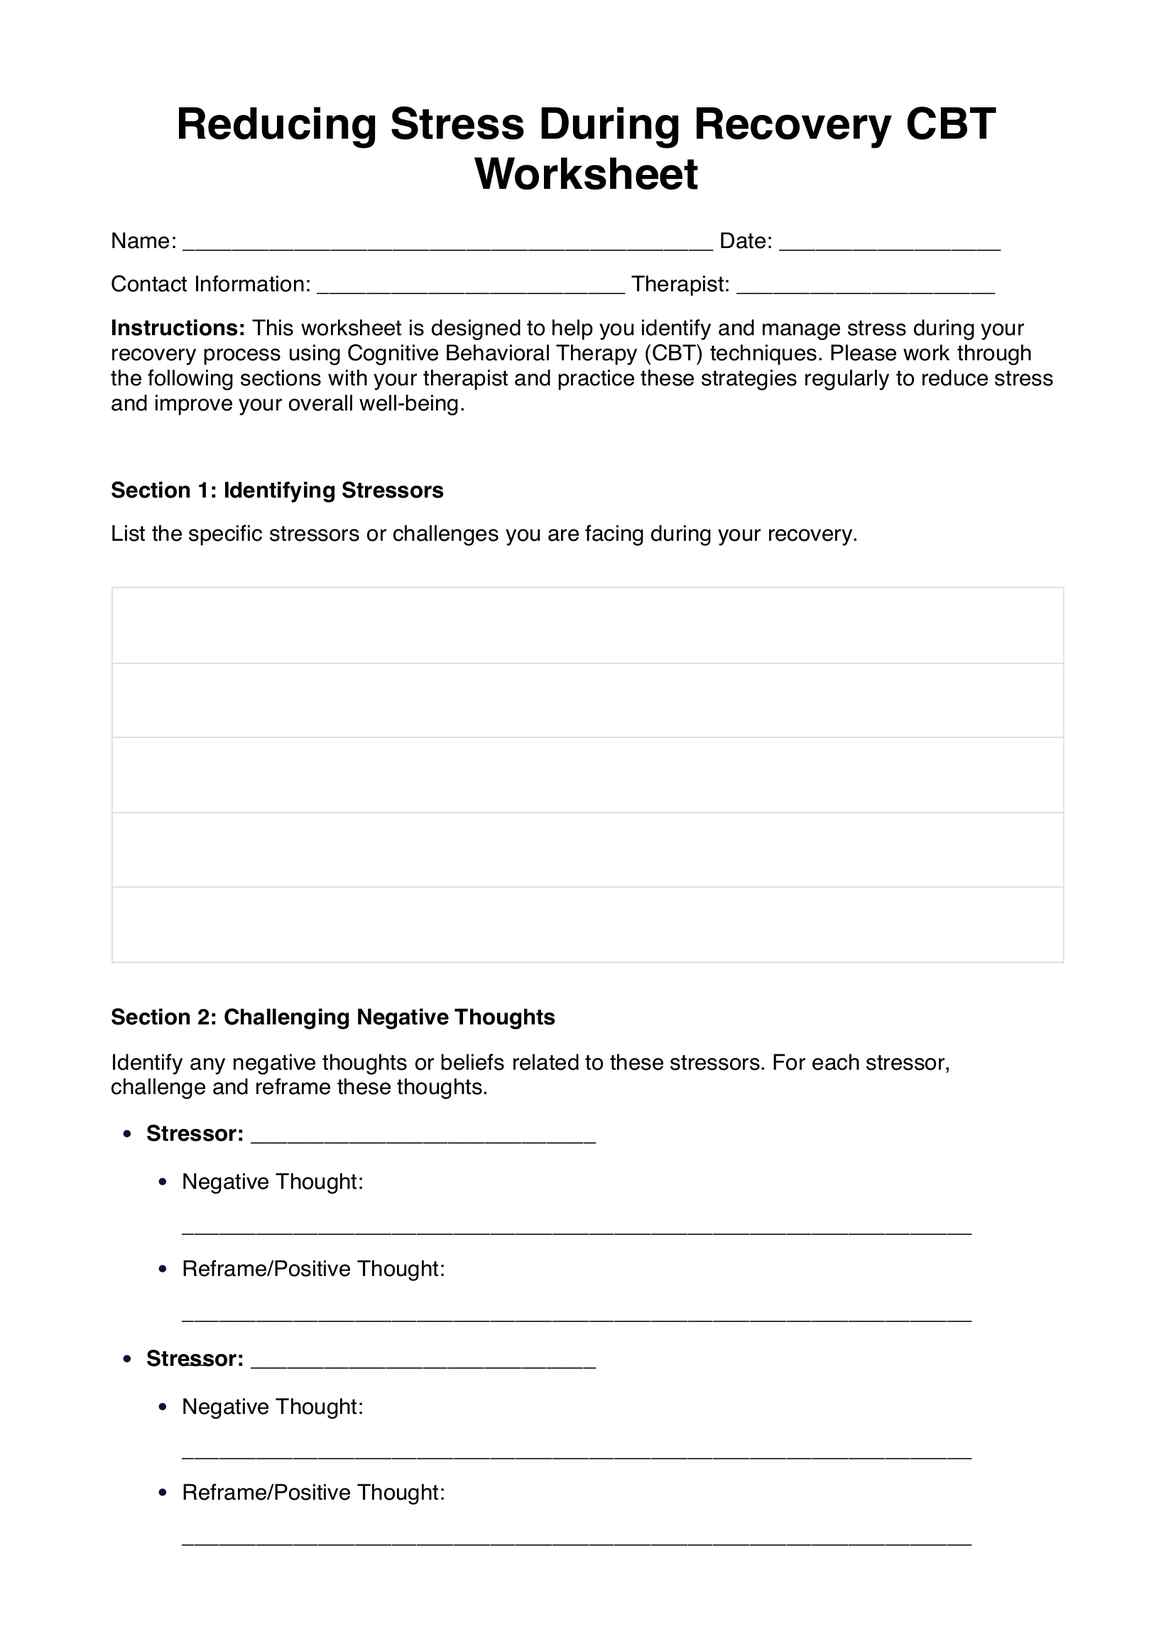 Reducing Stress During Recovery CBT Worksheet PDF Example